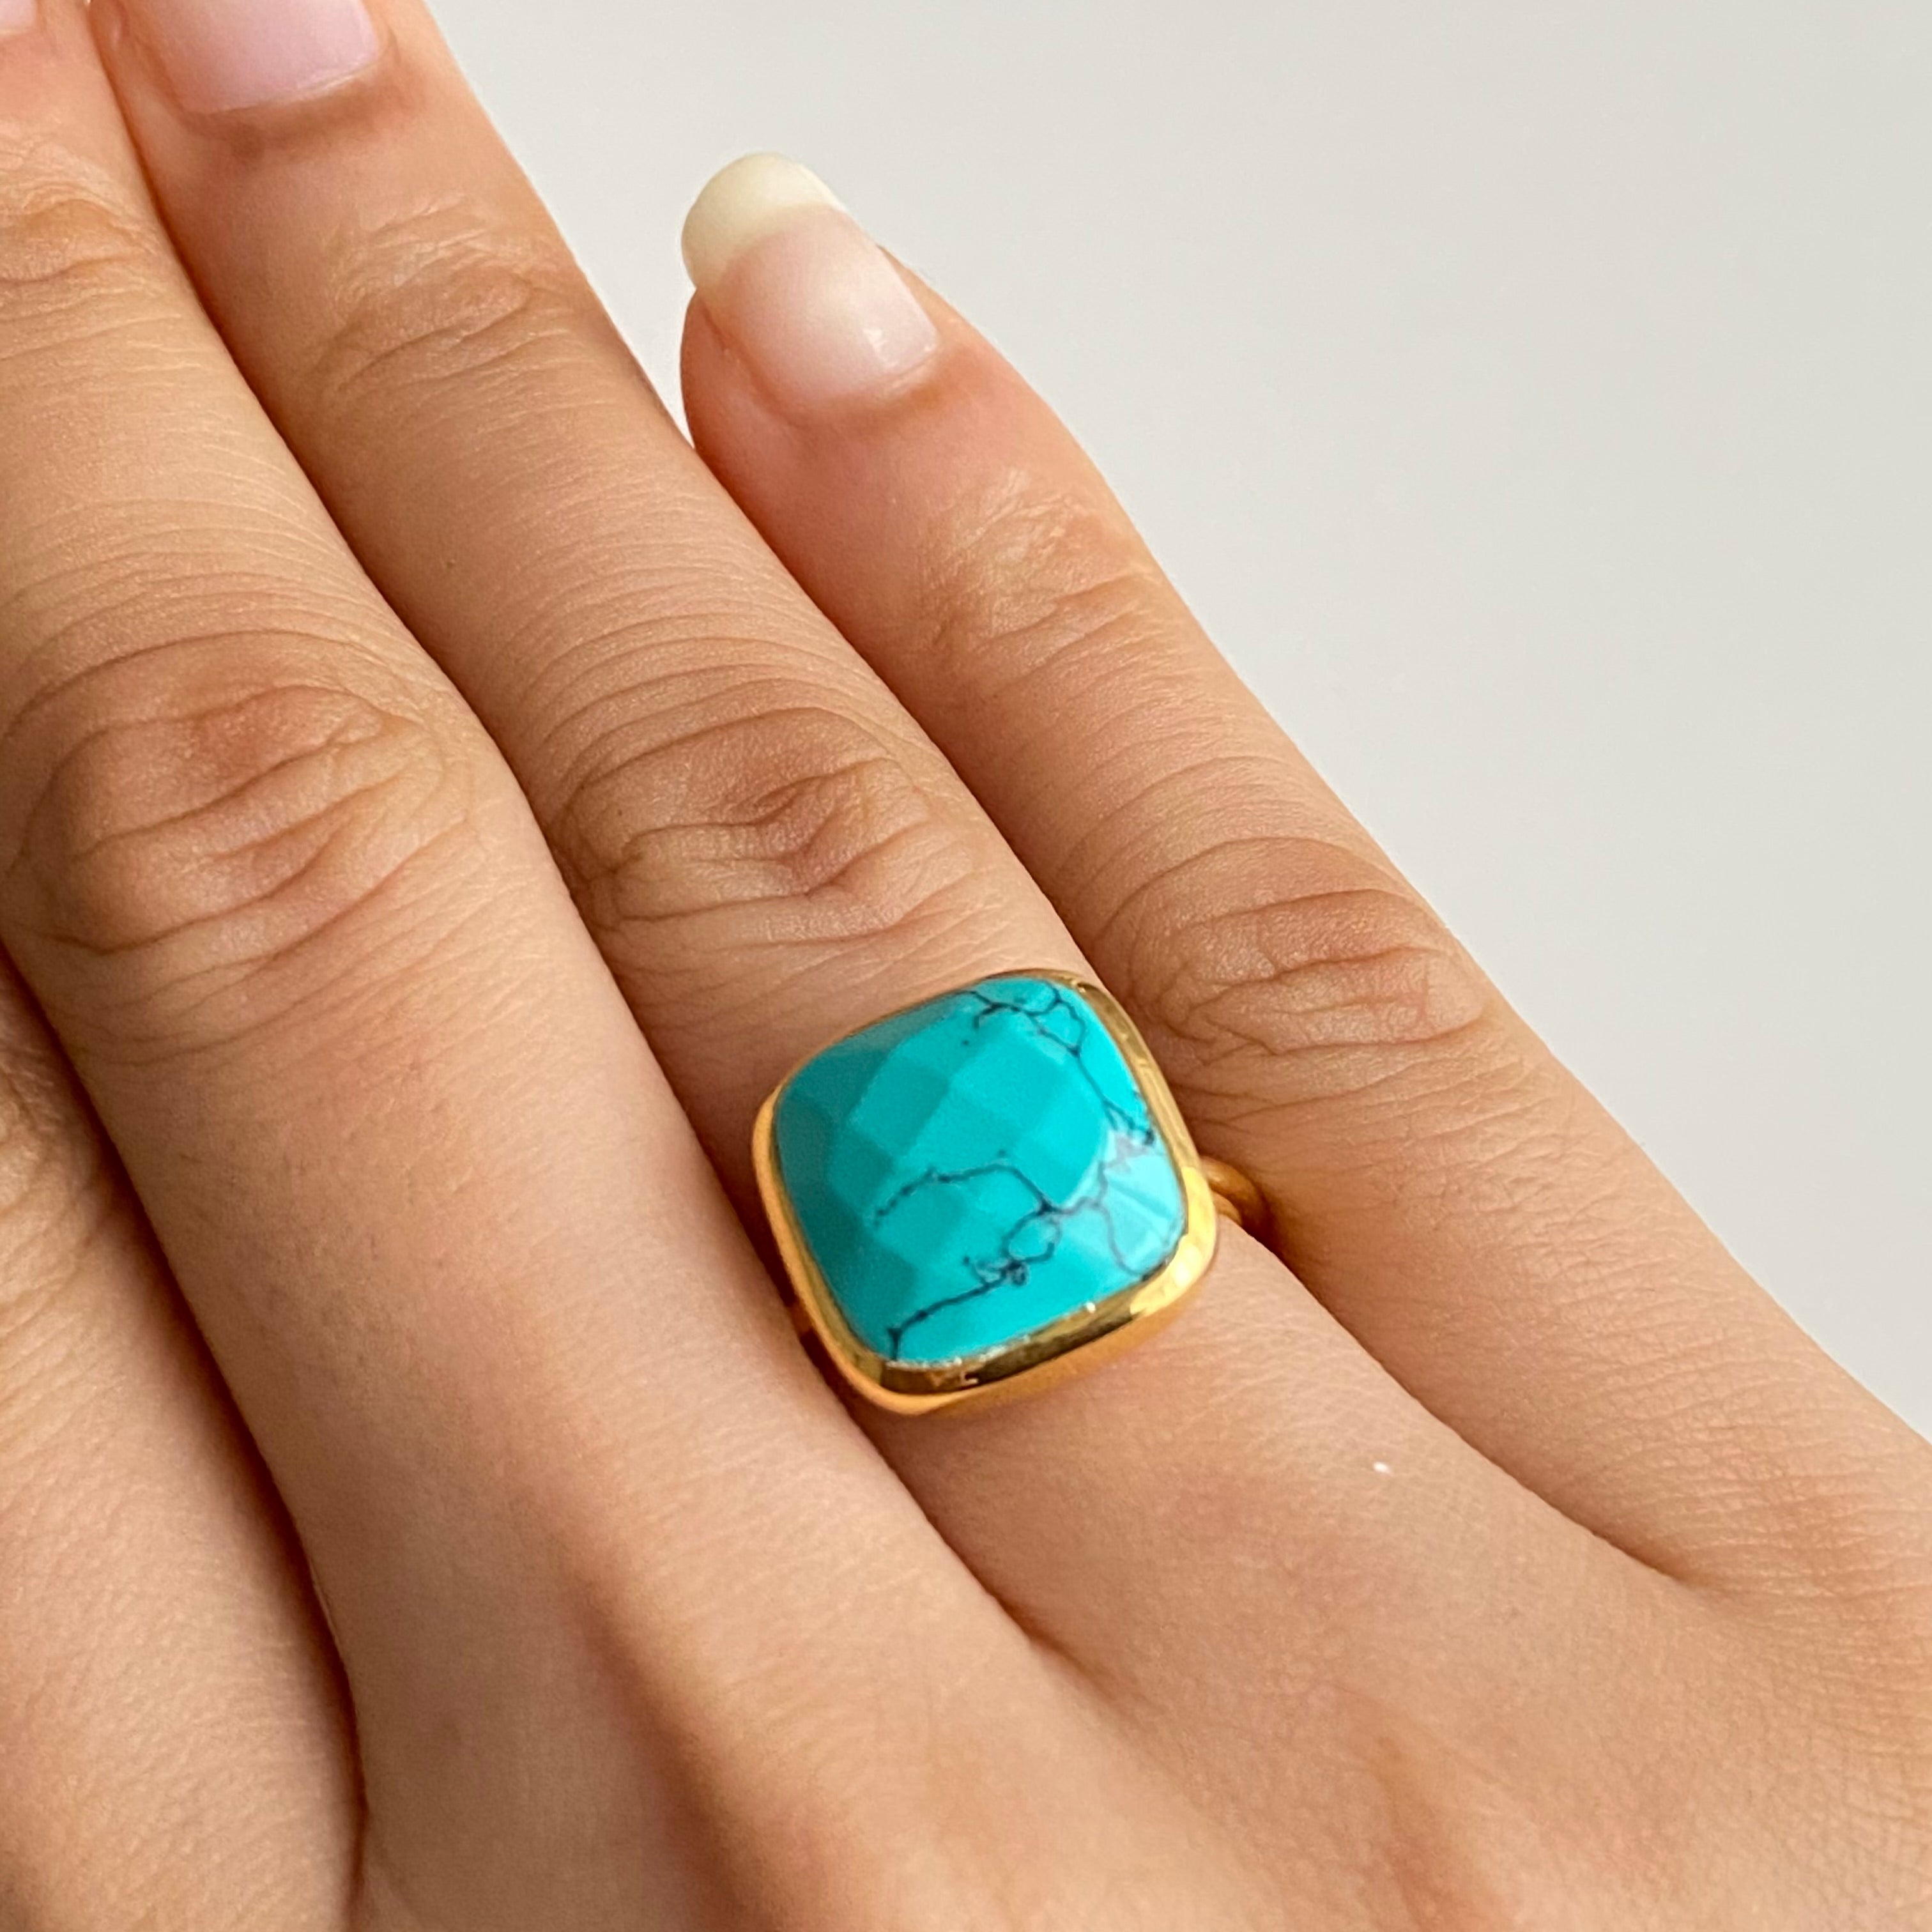 Gold Plated Silver Ring with Square Semiprecious Stone - Turquoise